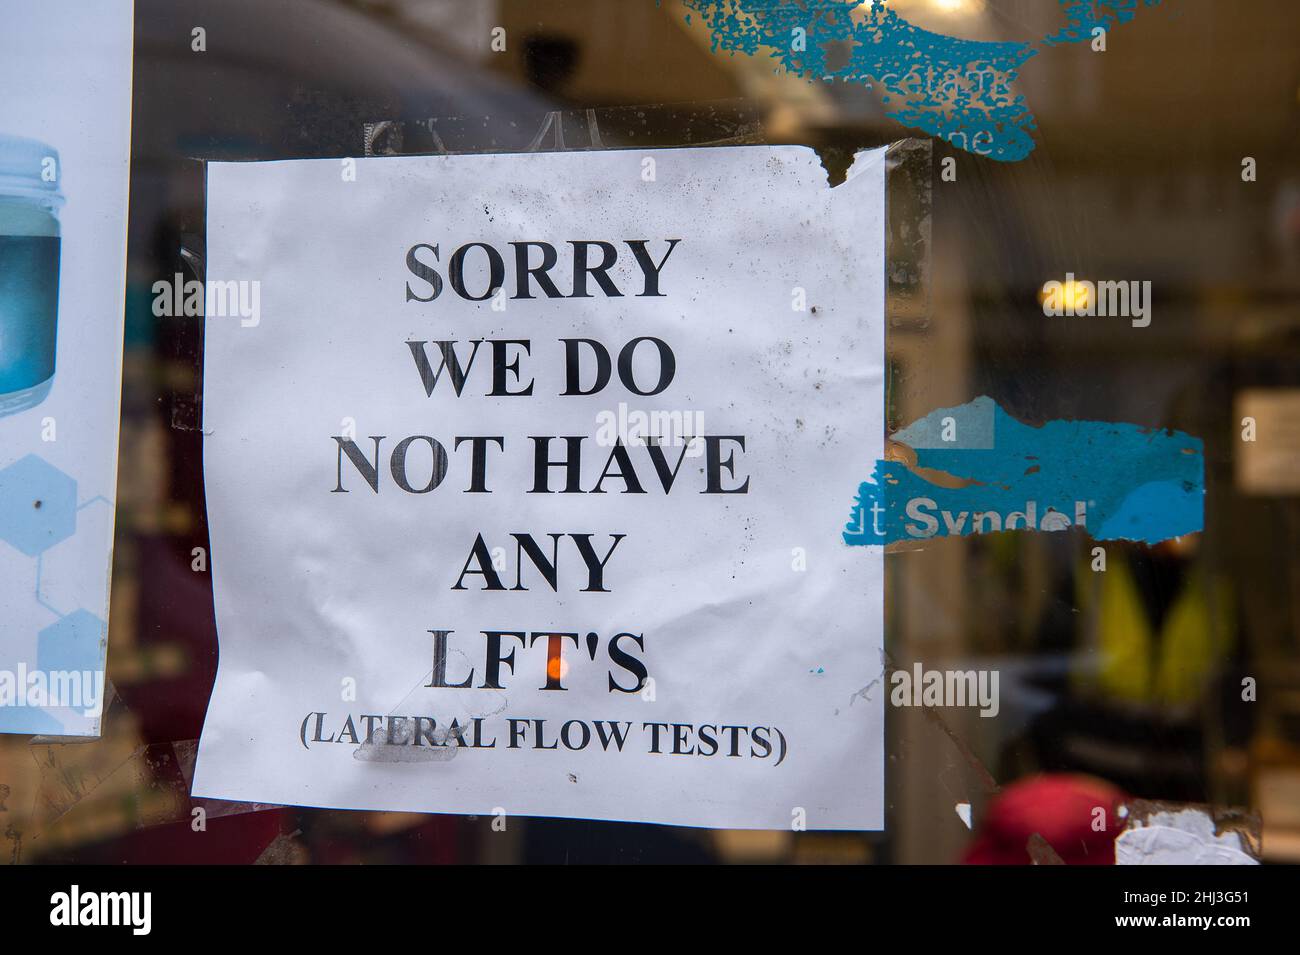 Weybridge, Surrey, UK. 26th January, 2022. A notice in a pharmacy window telling customers that they have no Covid-19 Lateral Flow Test packs available. Credit: Maureen McLean/Alamy Stock Photo